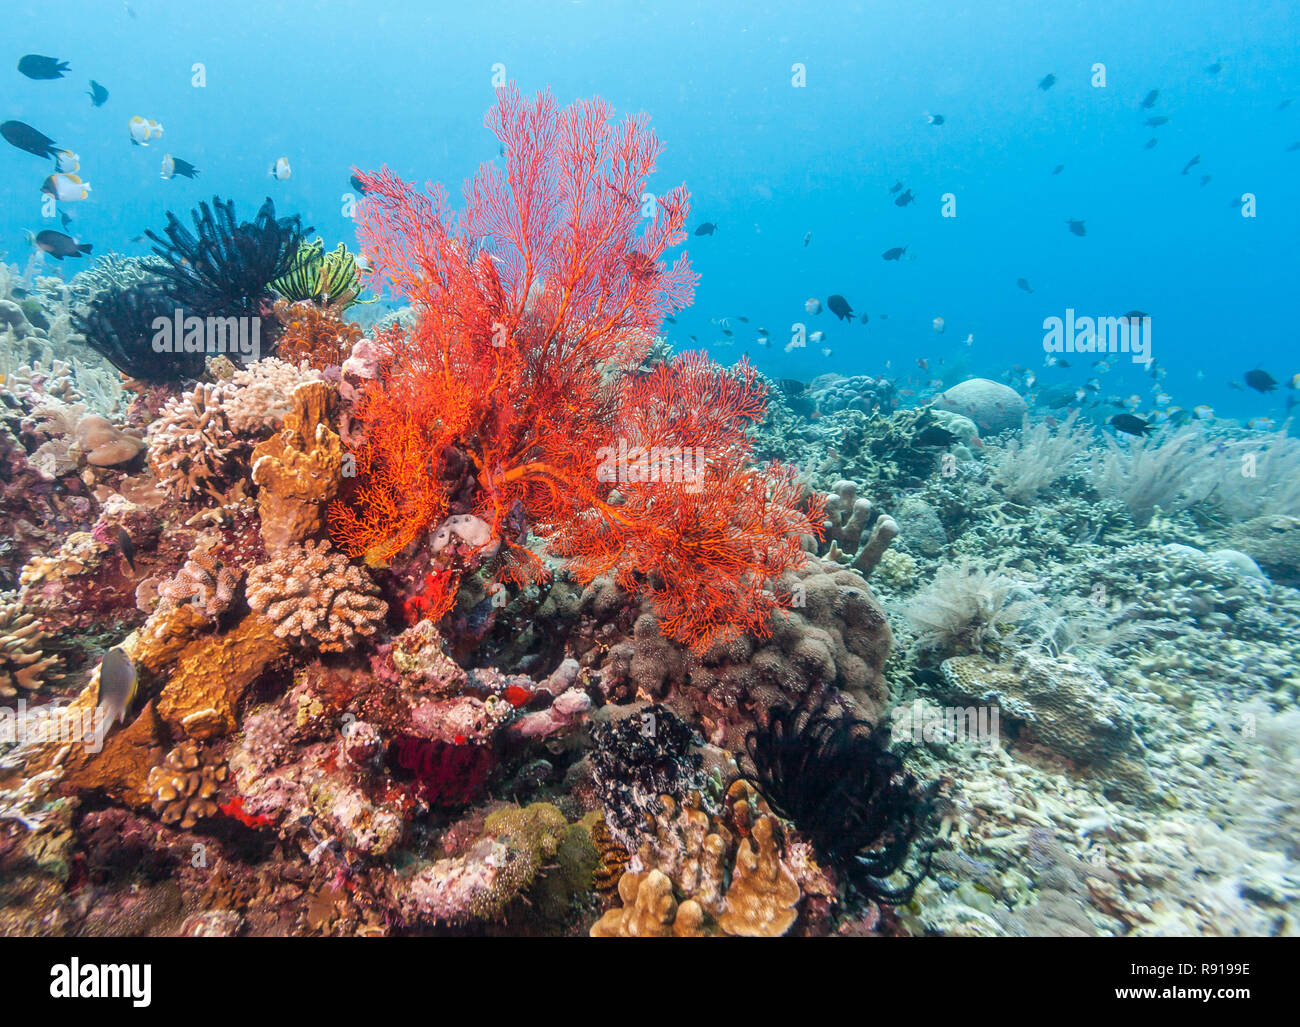 Coral reef off the Coast of Bali Indonesia Stock Photo